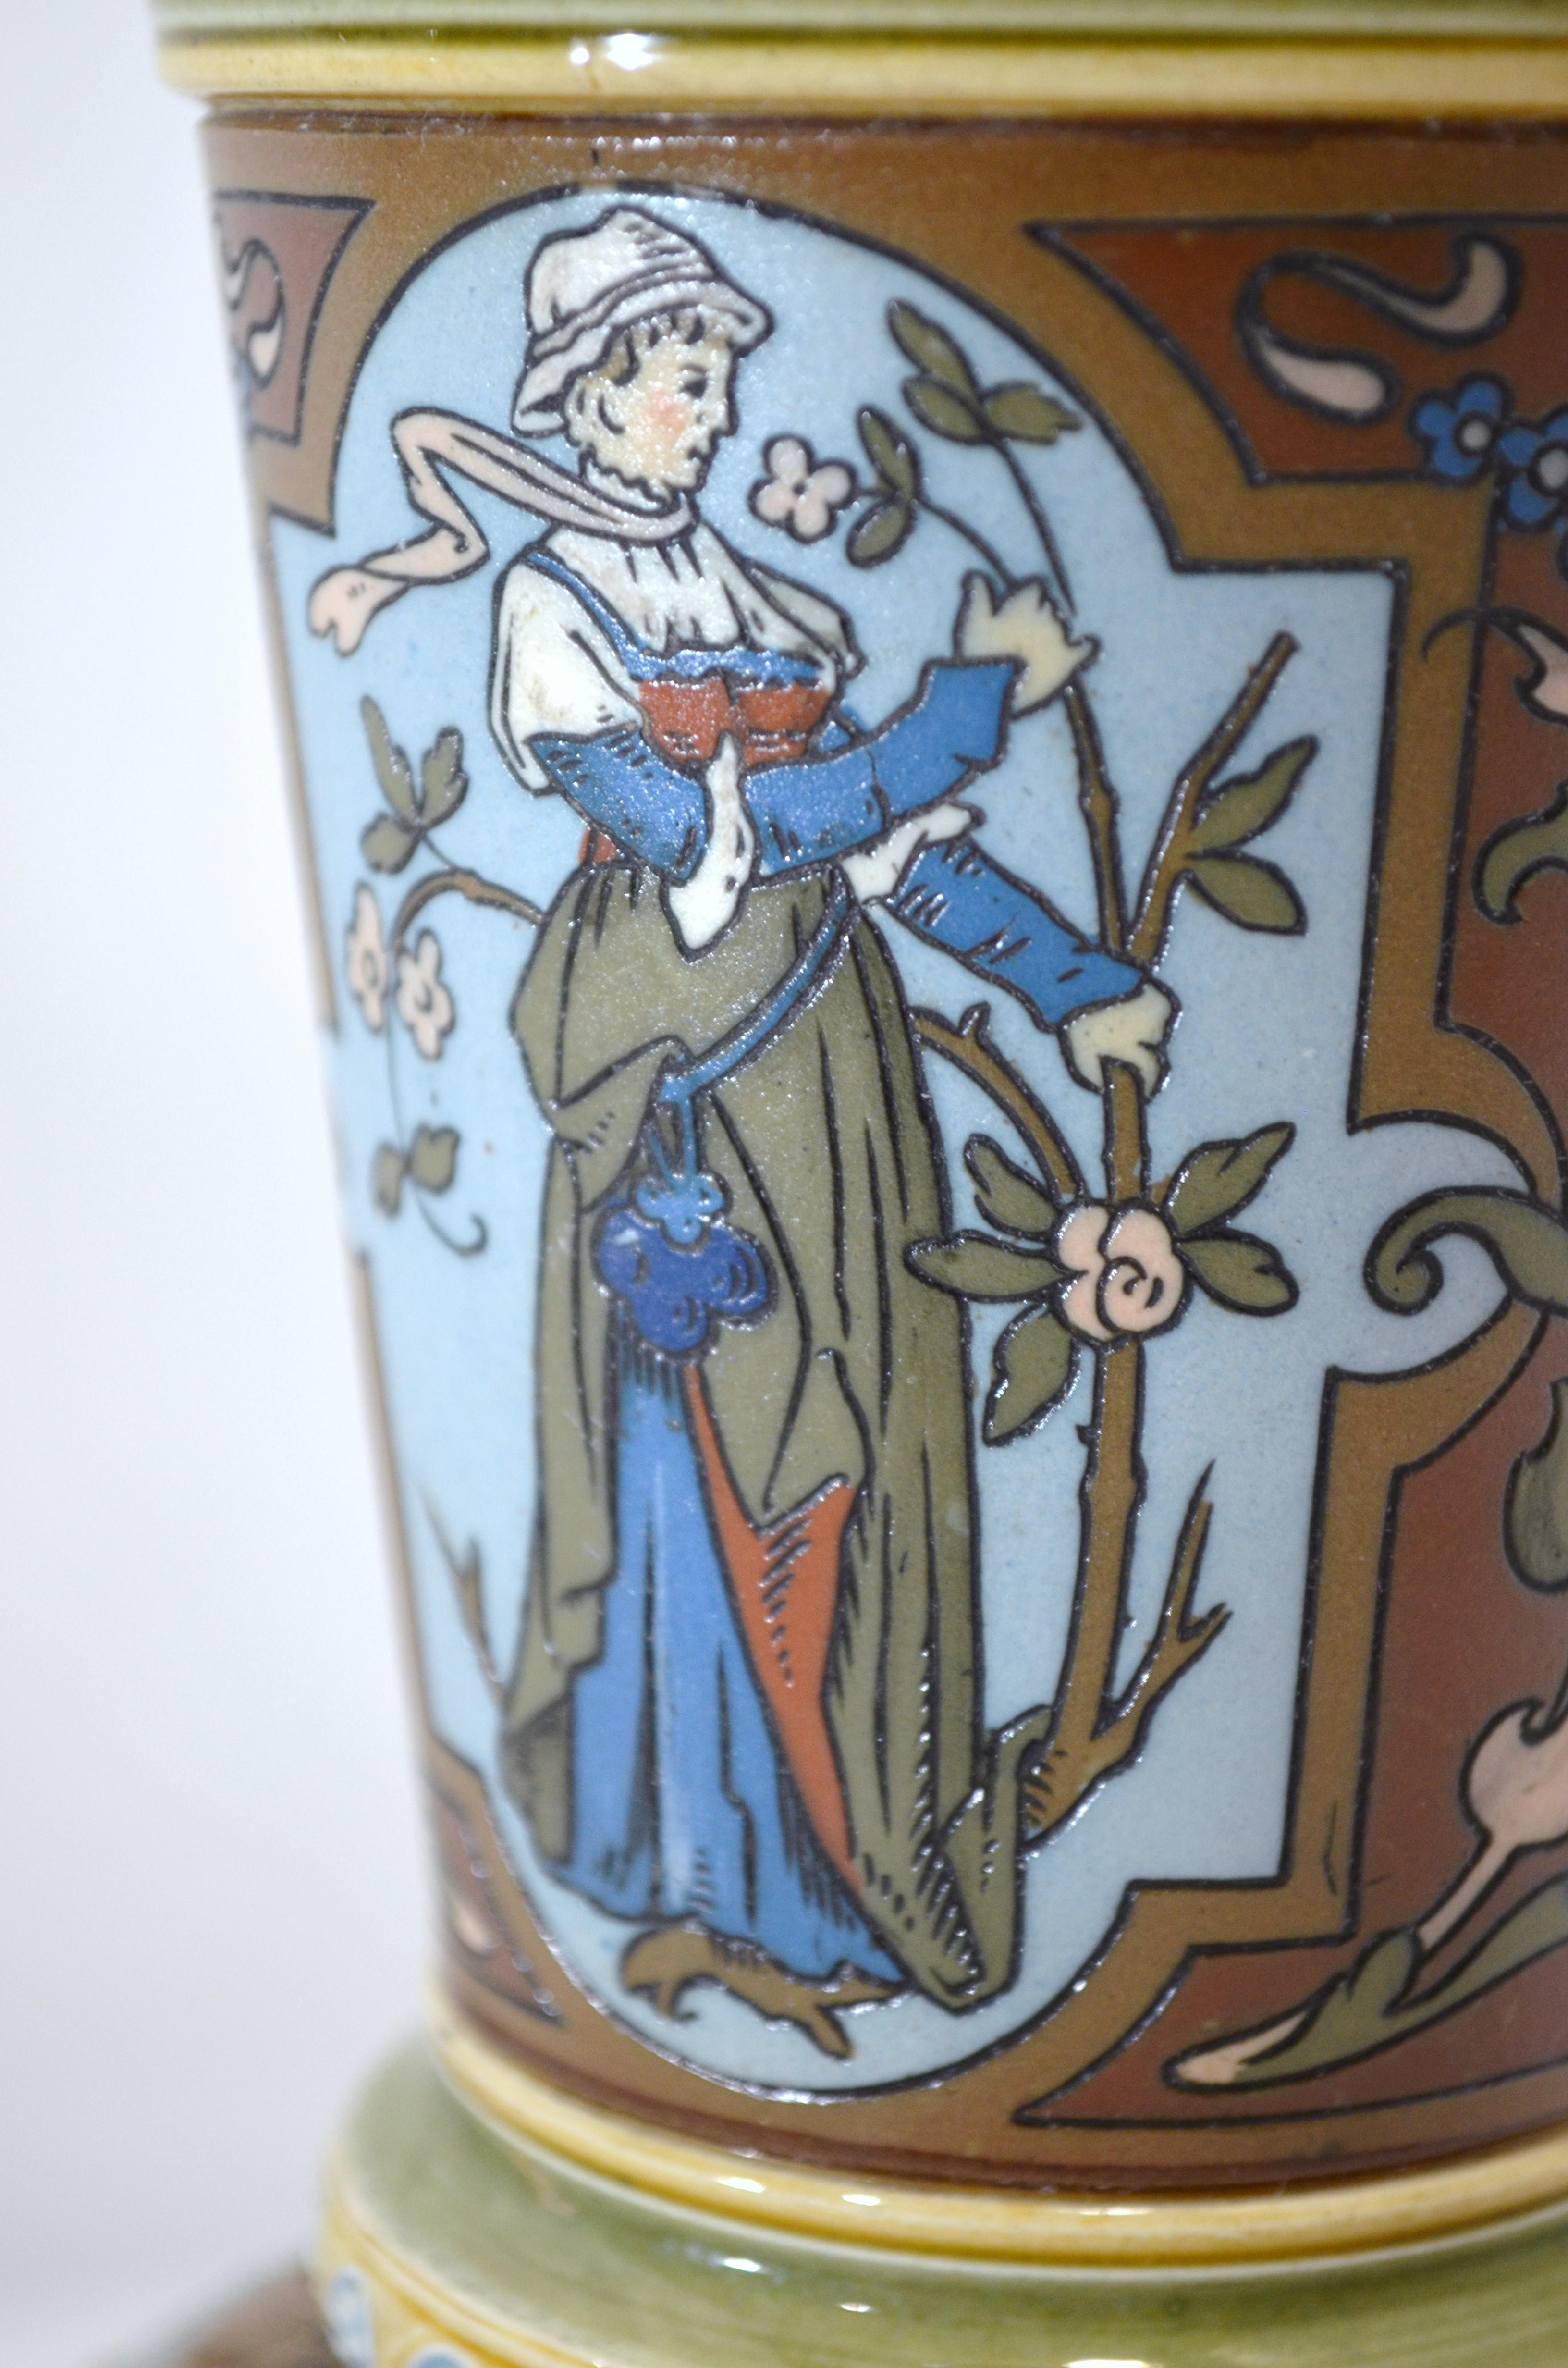 Villeroy and Boch Mettlach 1890 1900 Mosaic Ceramic Vase Decorated with Women For Sale 1